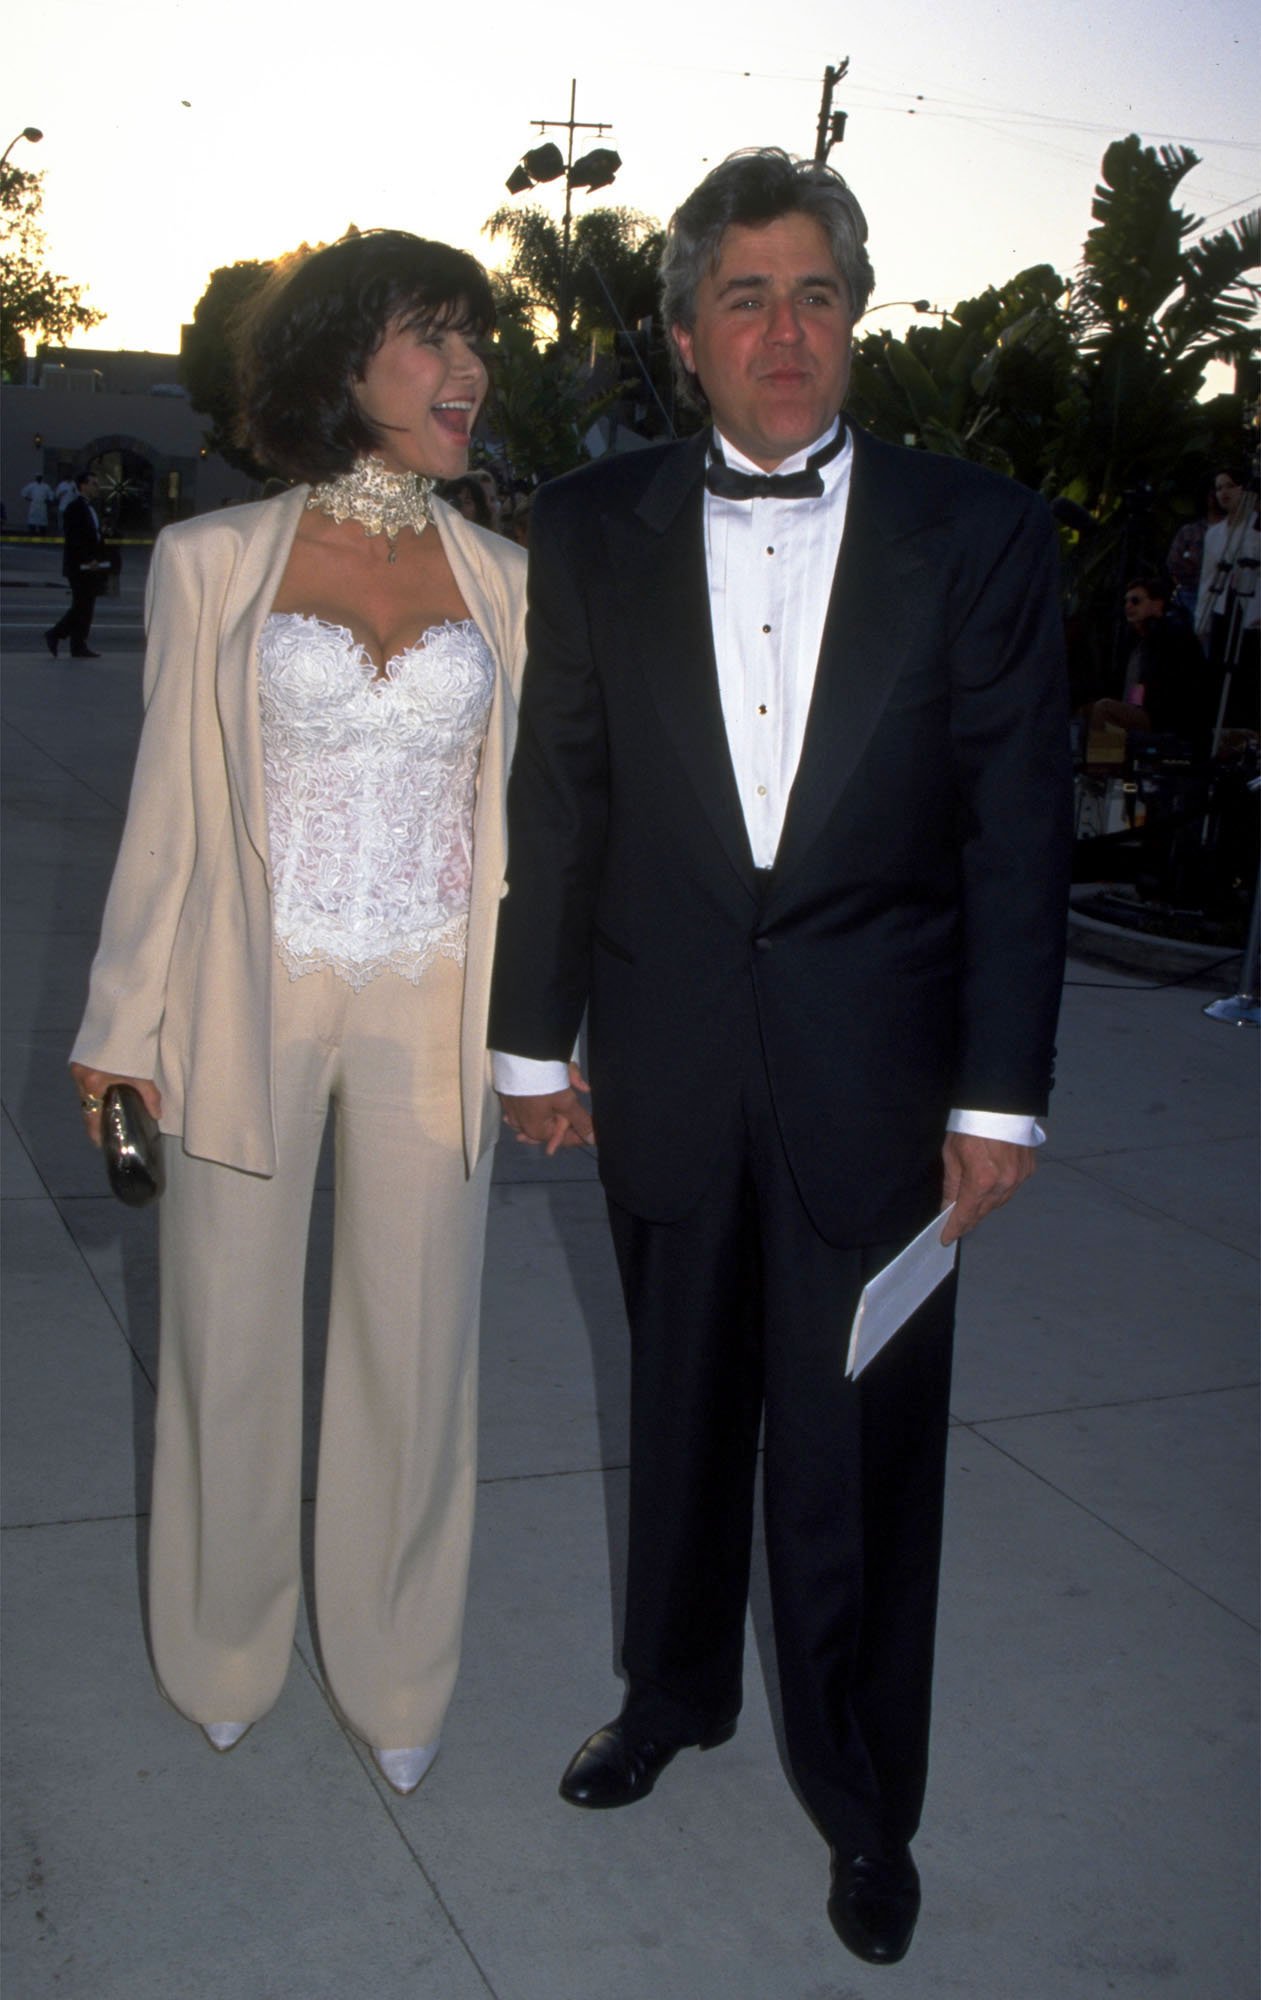 Mavis and Jay Leno posing for a photo on March 5, 1999. | Source: Diane Freed/Getty Images